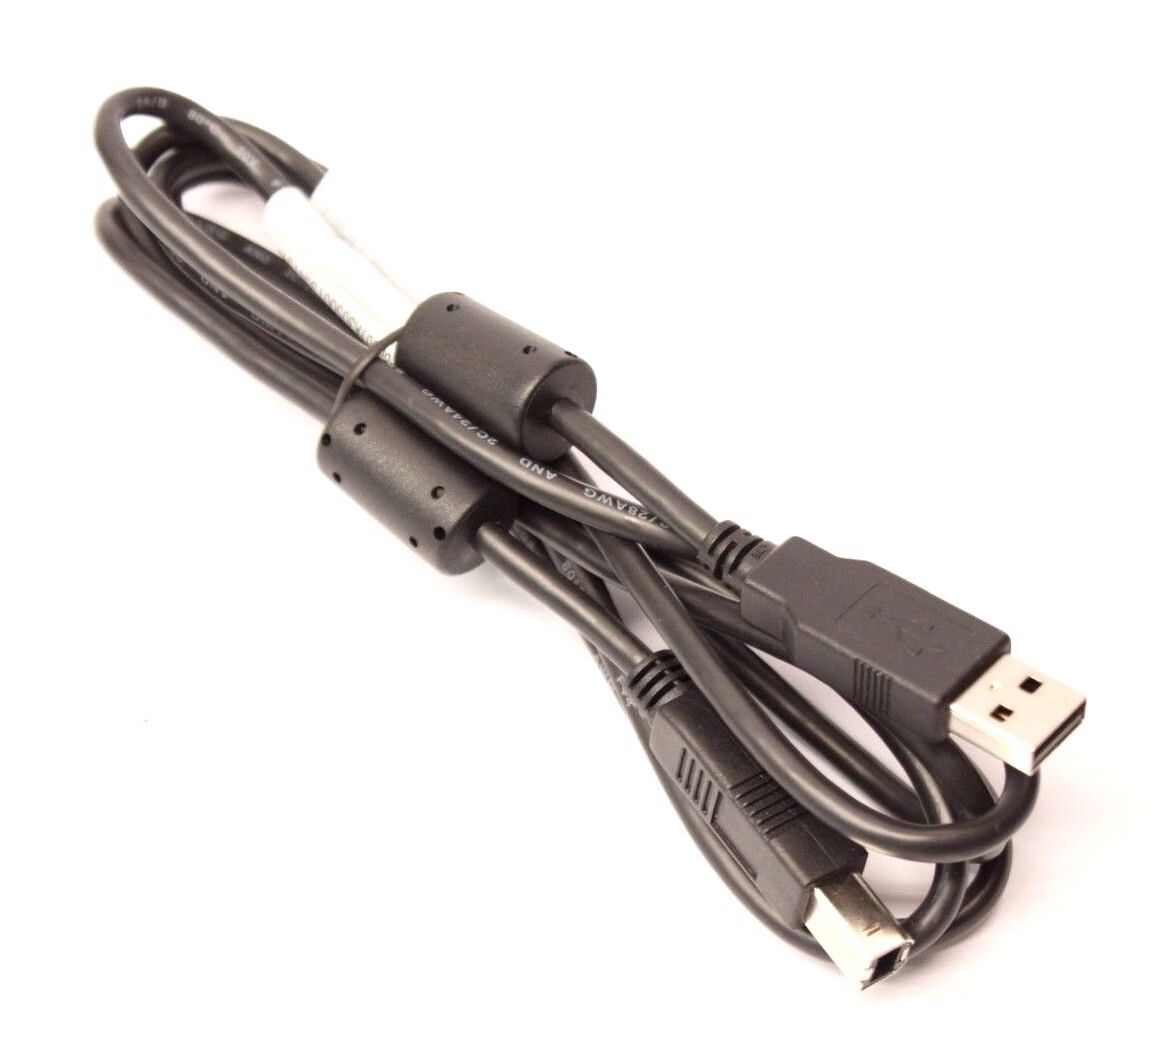 USB 2.0 A/B 6' Printer Scanner Cable Cord for Epson WorkForce Pro Series Printer